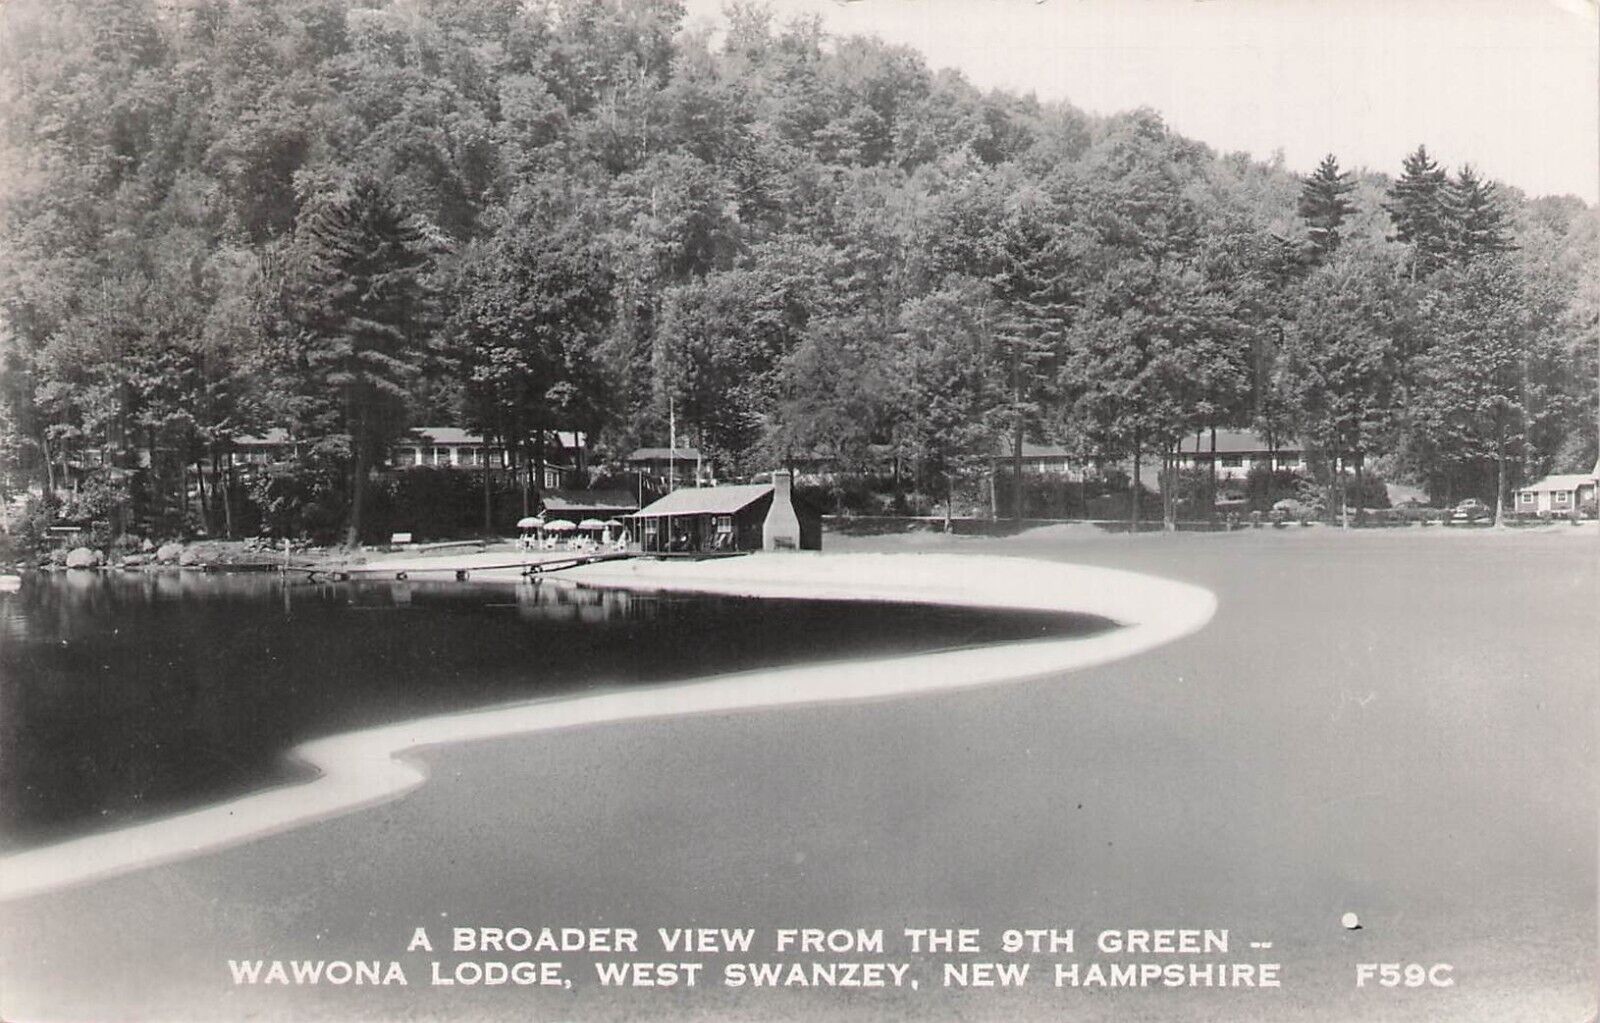 RPPC Broader View the 9th Green Wawona Lodge, West Swanzey New Hampshire PM 1955